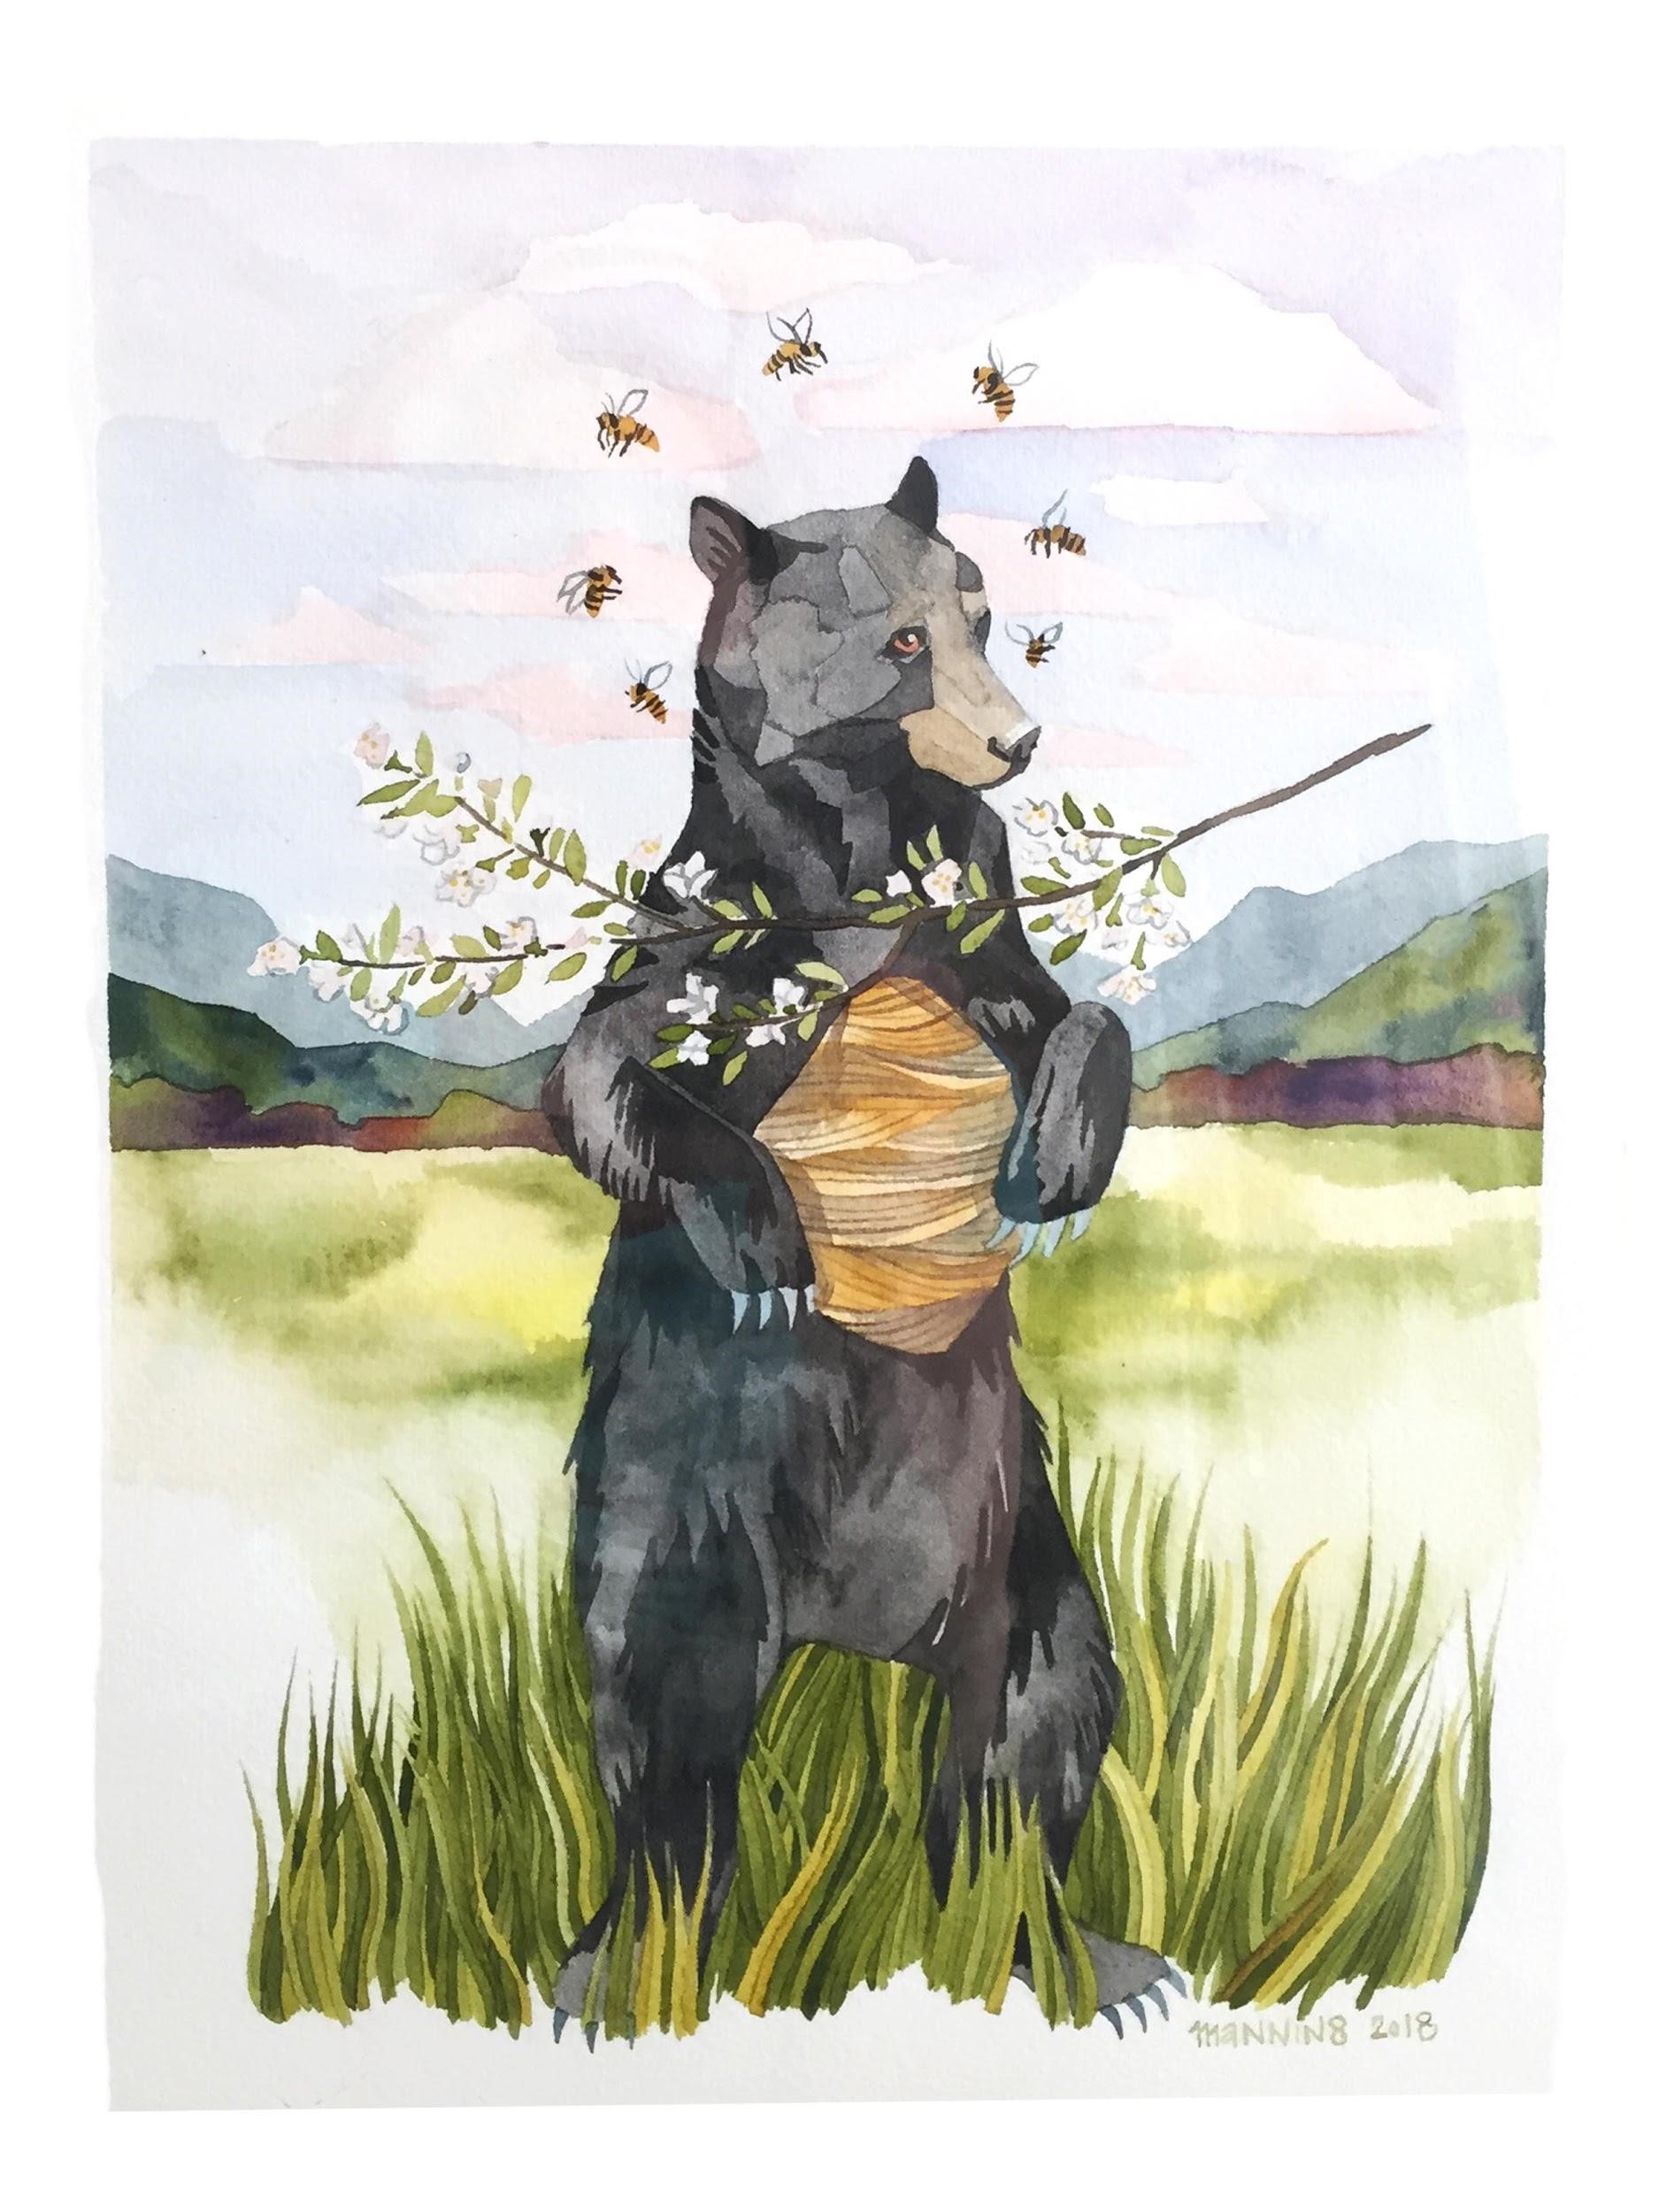 "The Bear" by Marni Manning